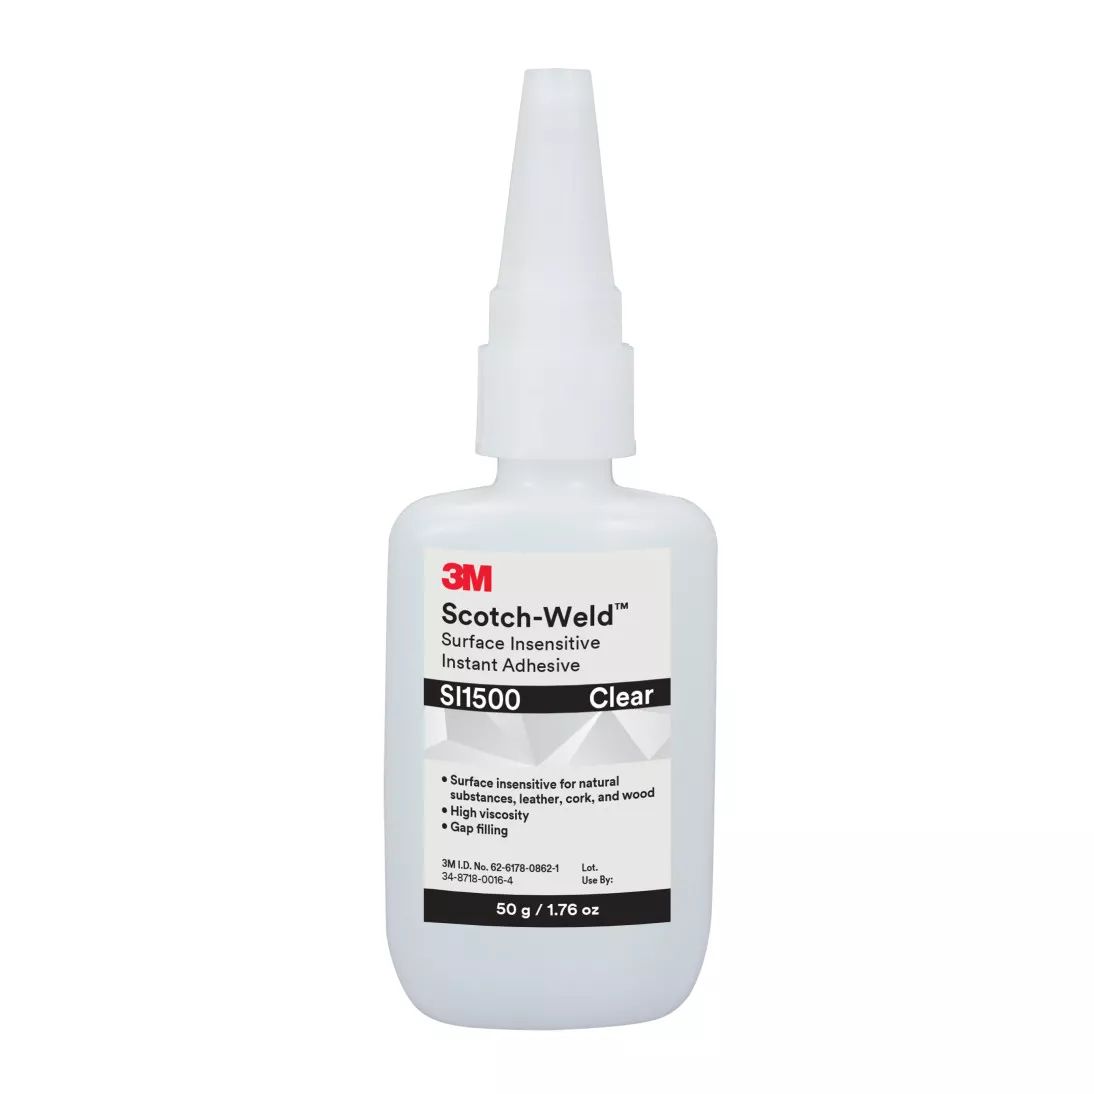 3M™ Scotch-Weld™ Surface Insensitive Instant Adhesive SI1500, Clear, 50
Gram Bottle, 10/case